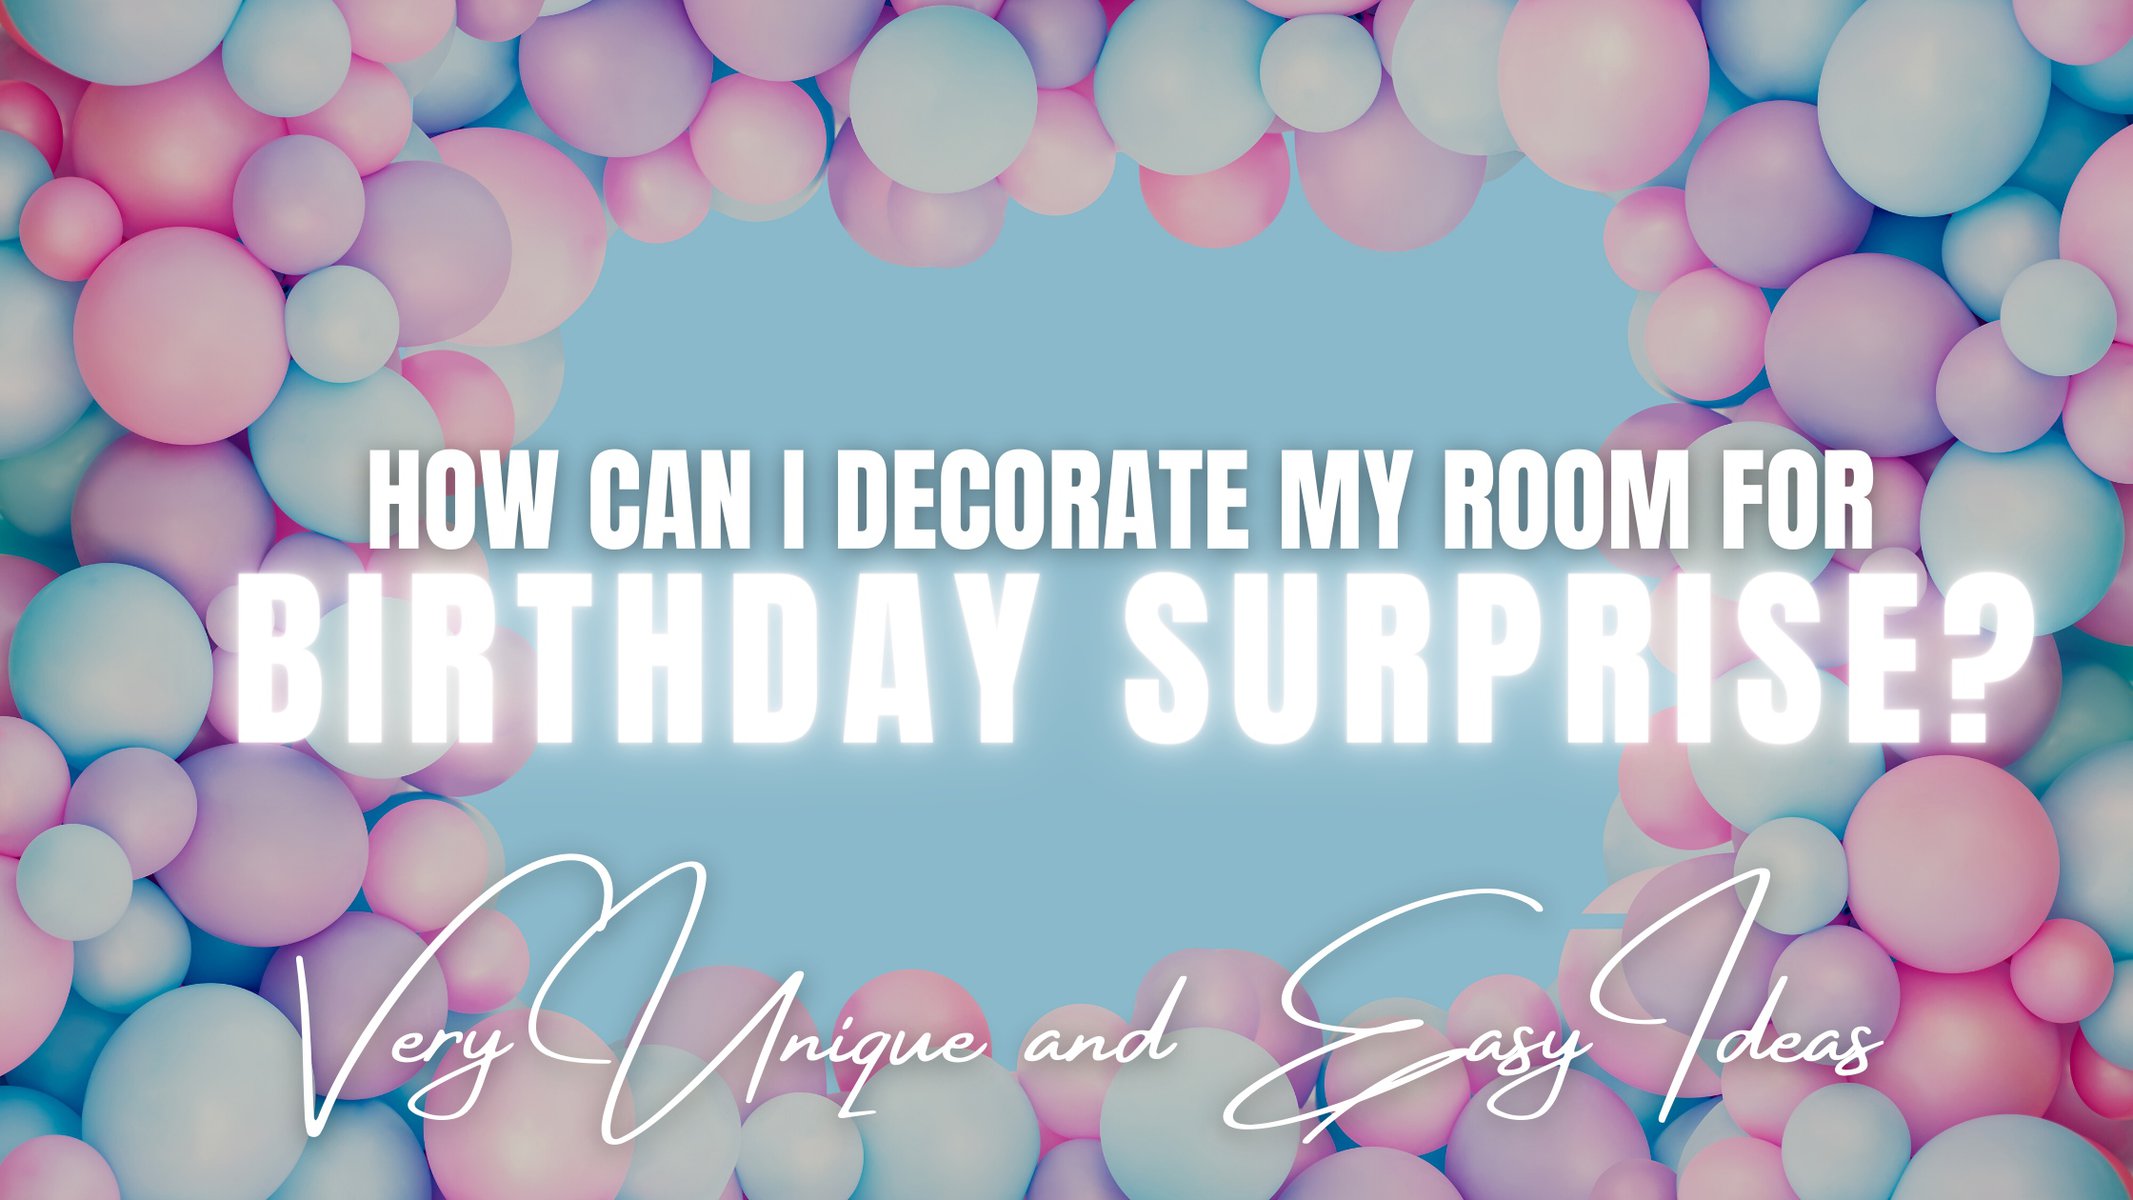 How can I decorate my room for a birthday surprise?